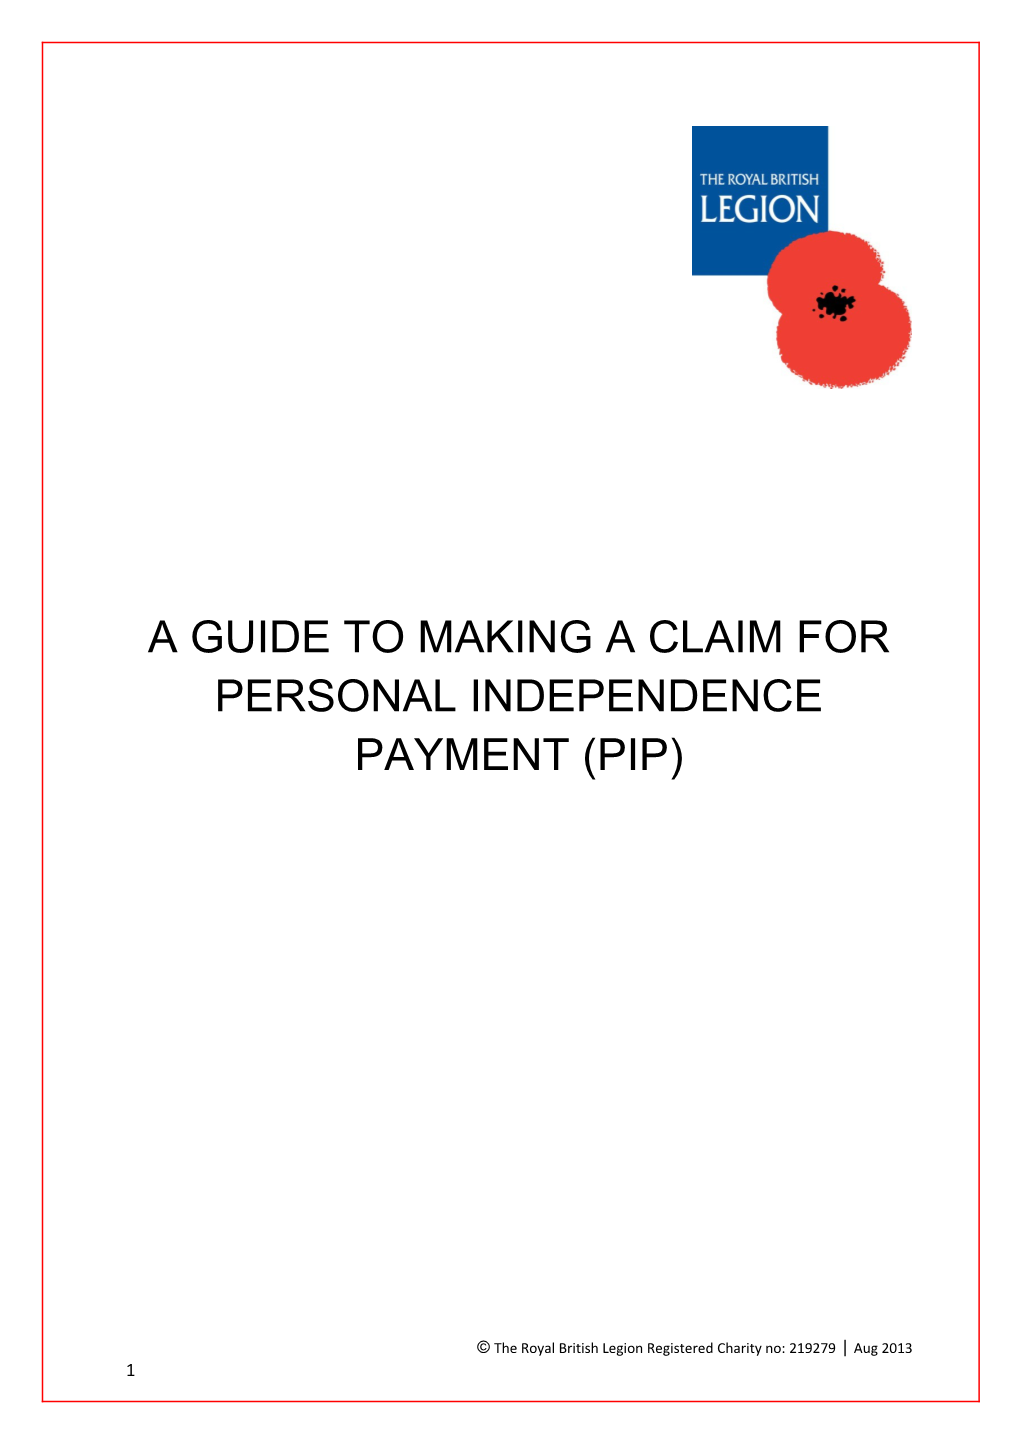 A Guide to Making a Claim for Personal Independence Payment (Pip)